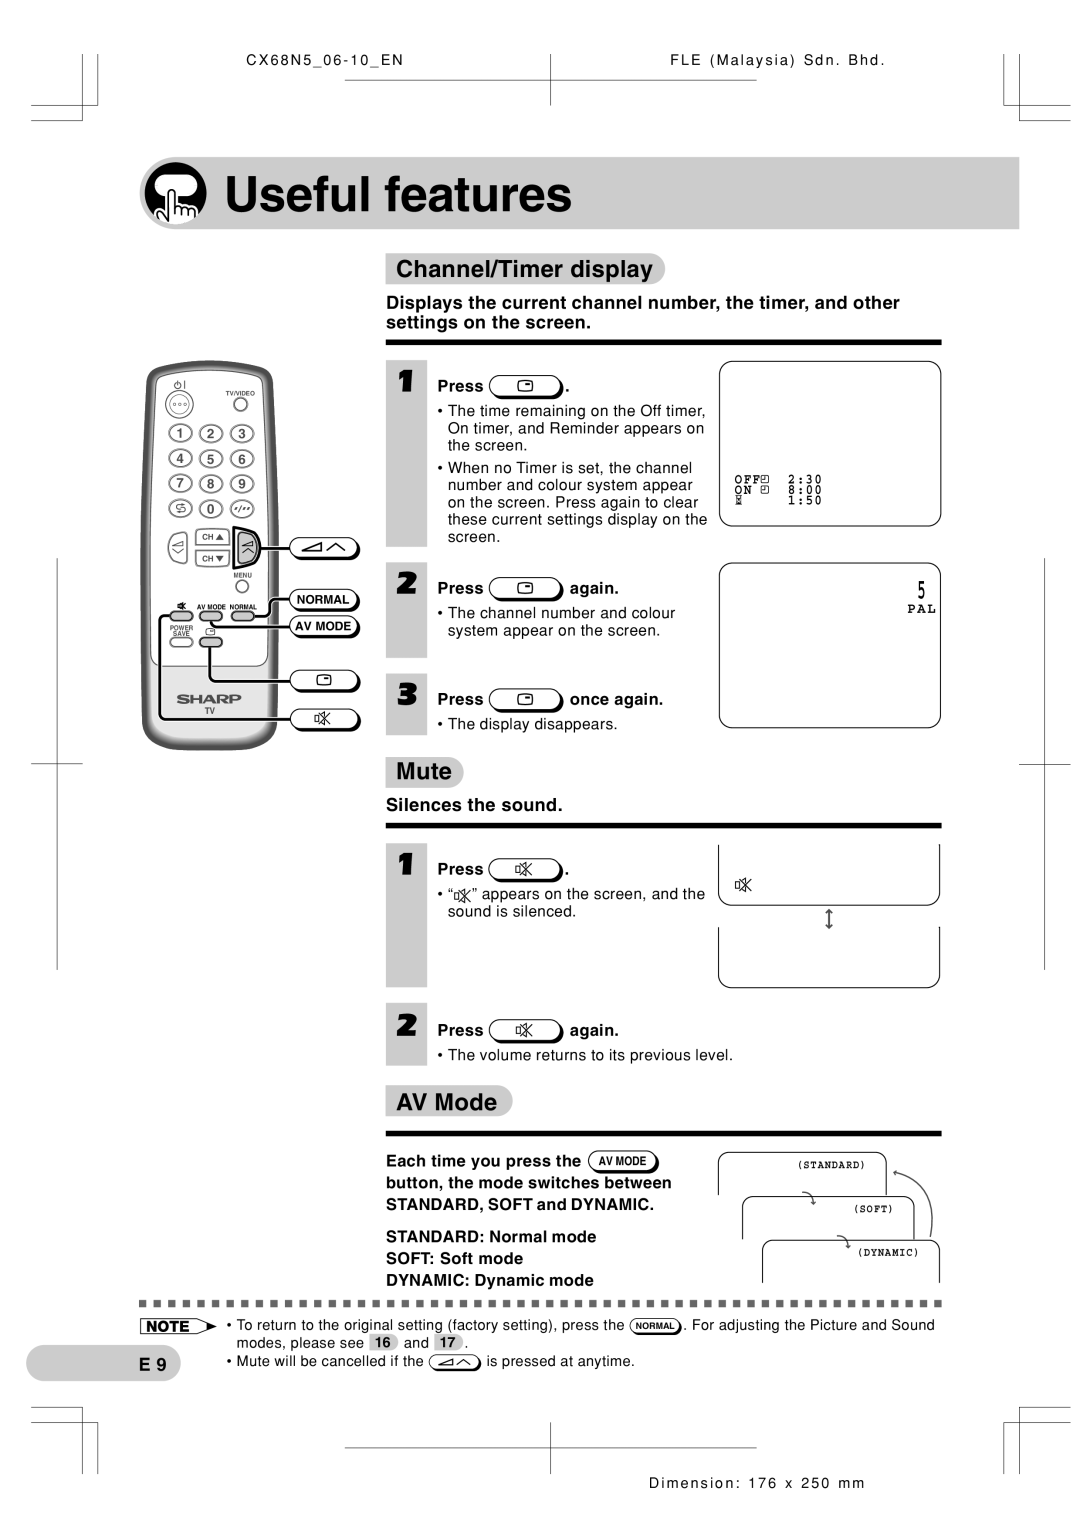 Sharp Cx68n5 operation manual Useful features, Channel/Timer display, Mute, AV Mode, Silences the sound 